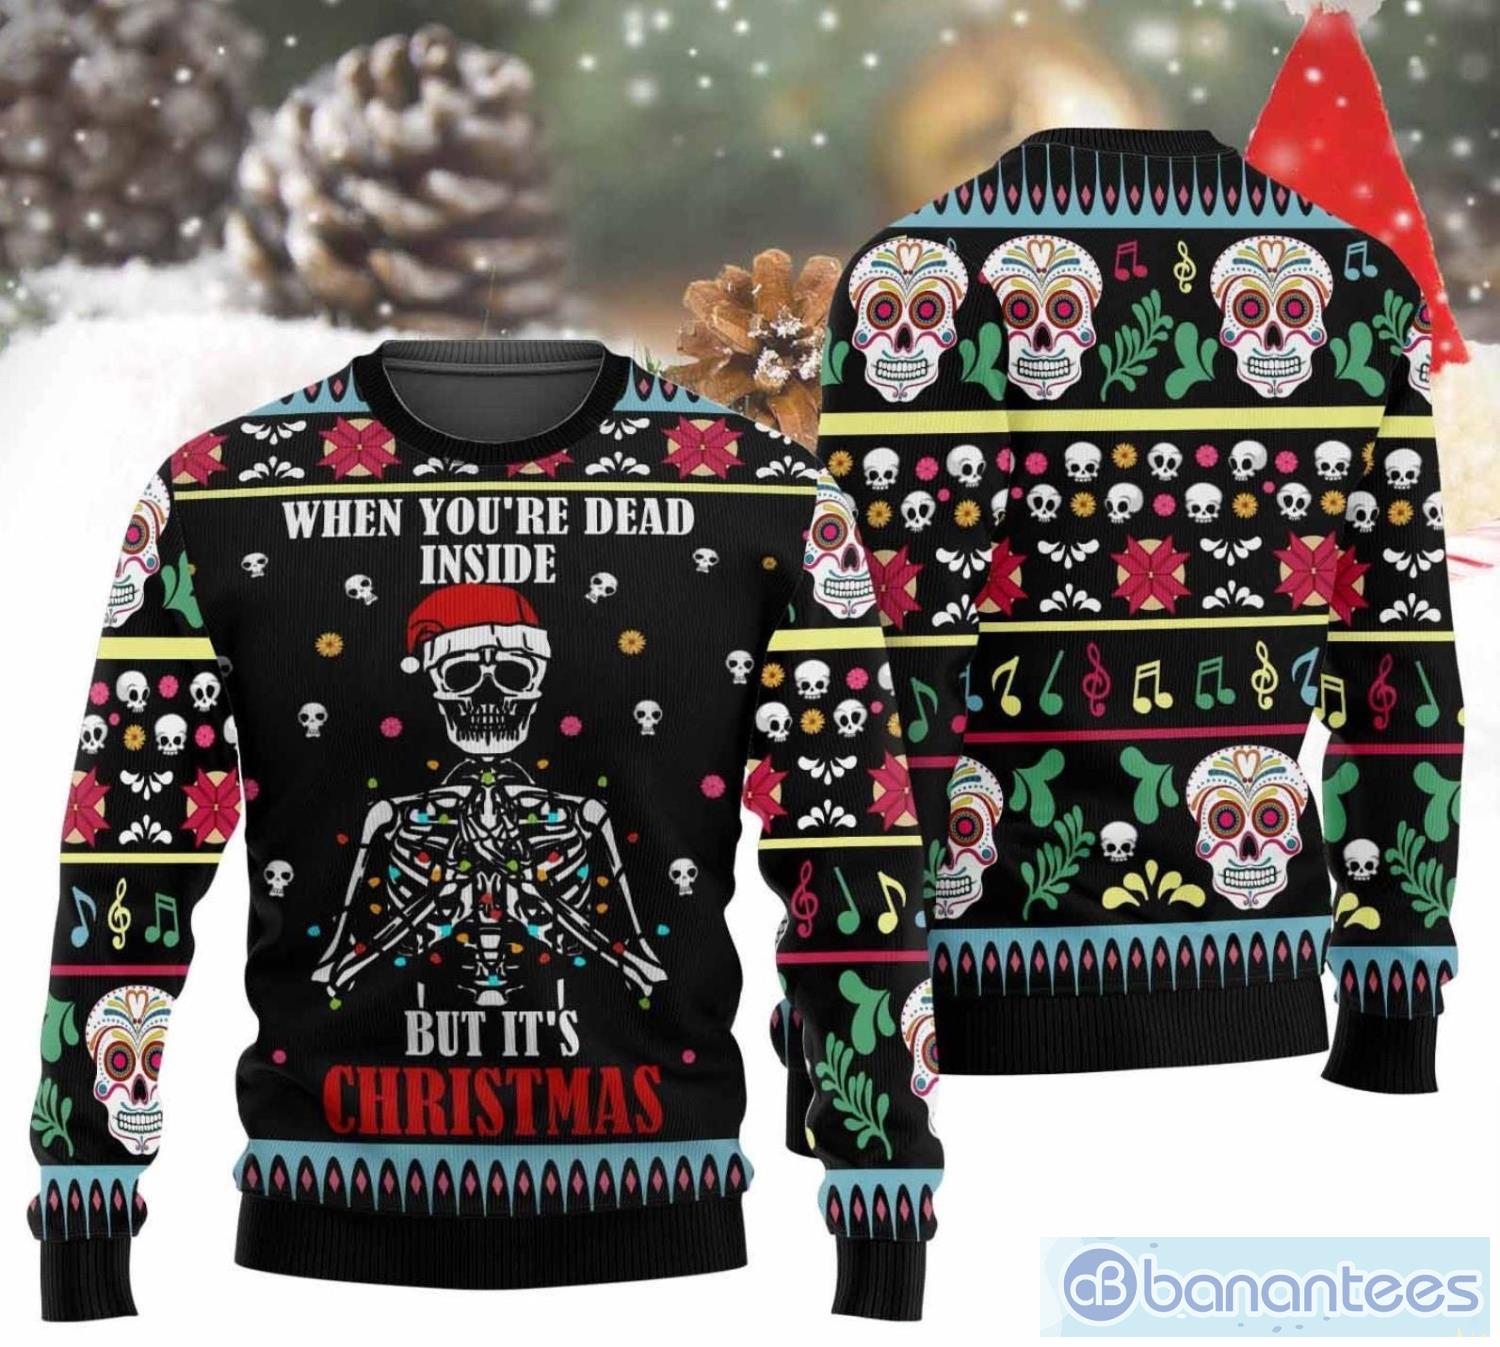 https://image.banantees.com/2023/09/when-you-dead-inside-but-its-christmas-skeleton-ugly-christmas-sweater.jpg